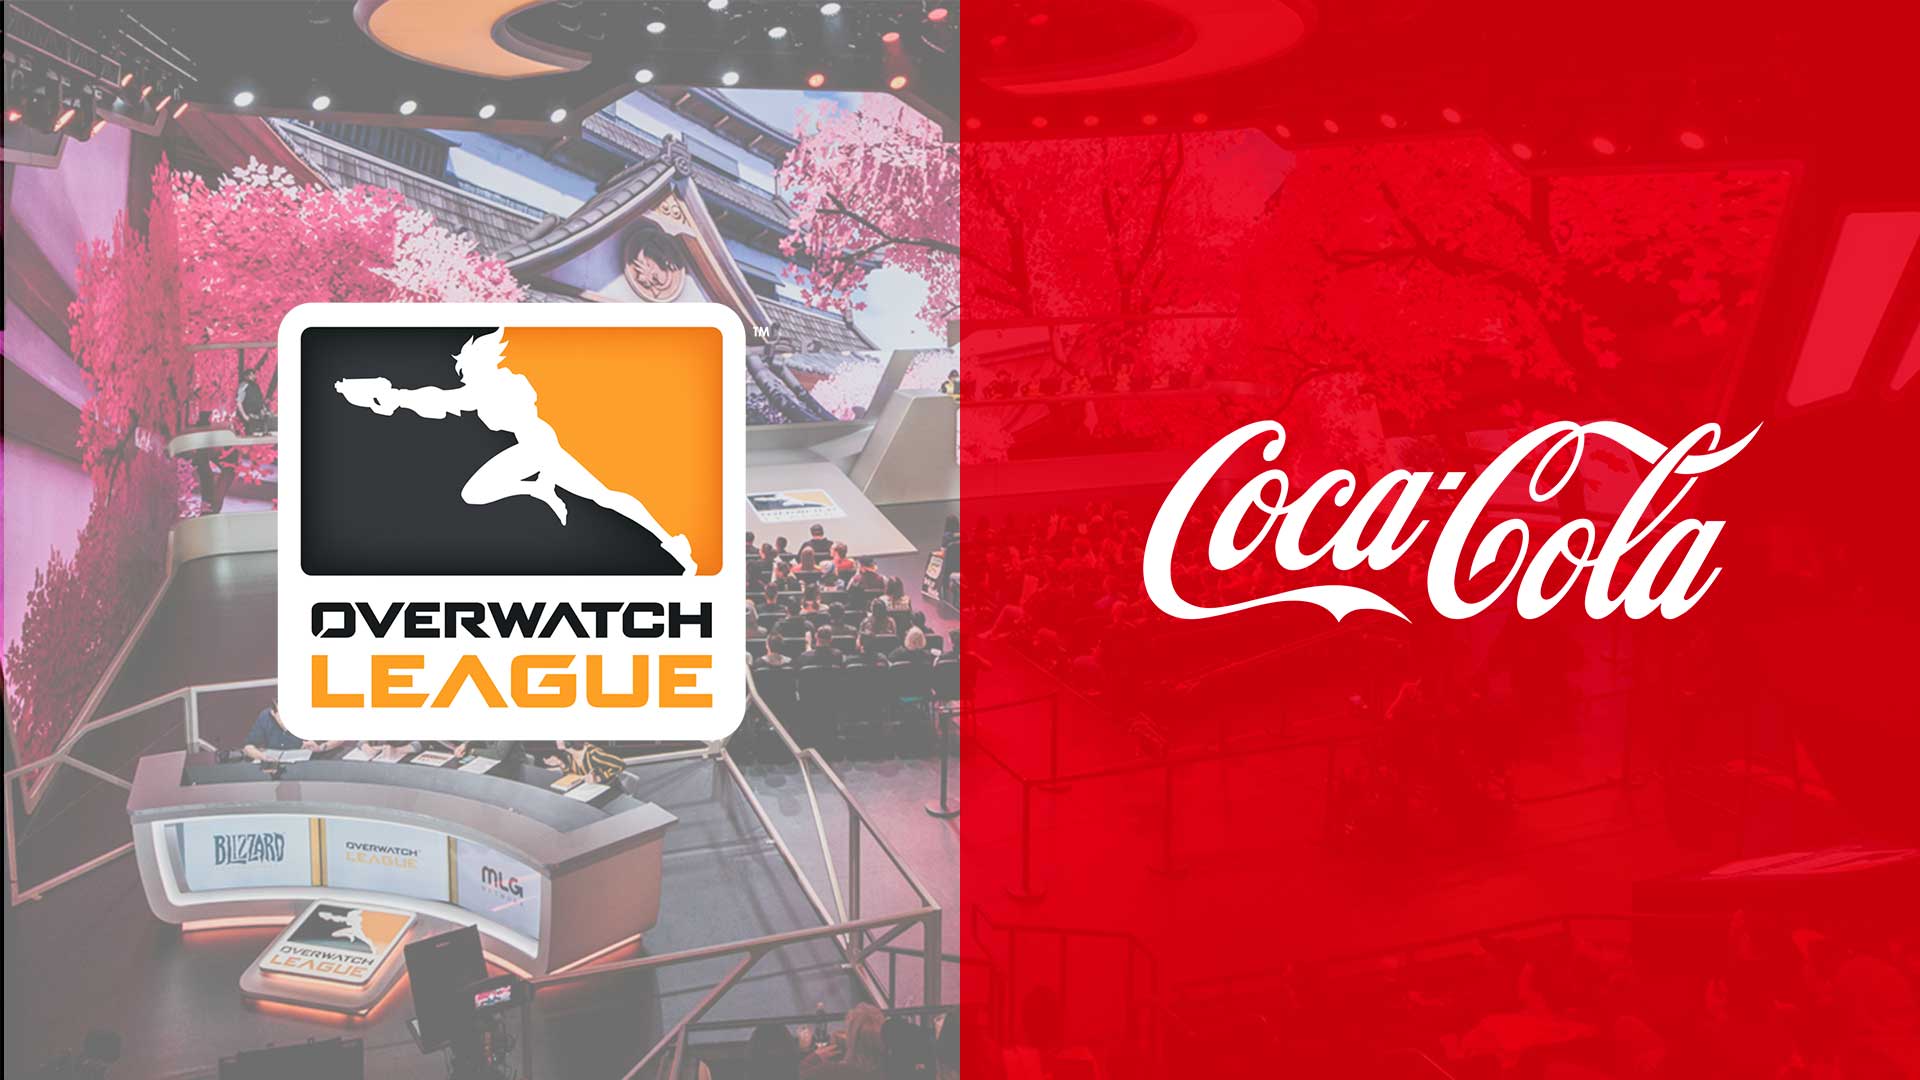 Overwatch League and Coca Cola logos